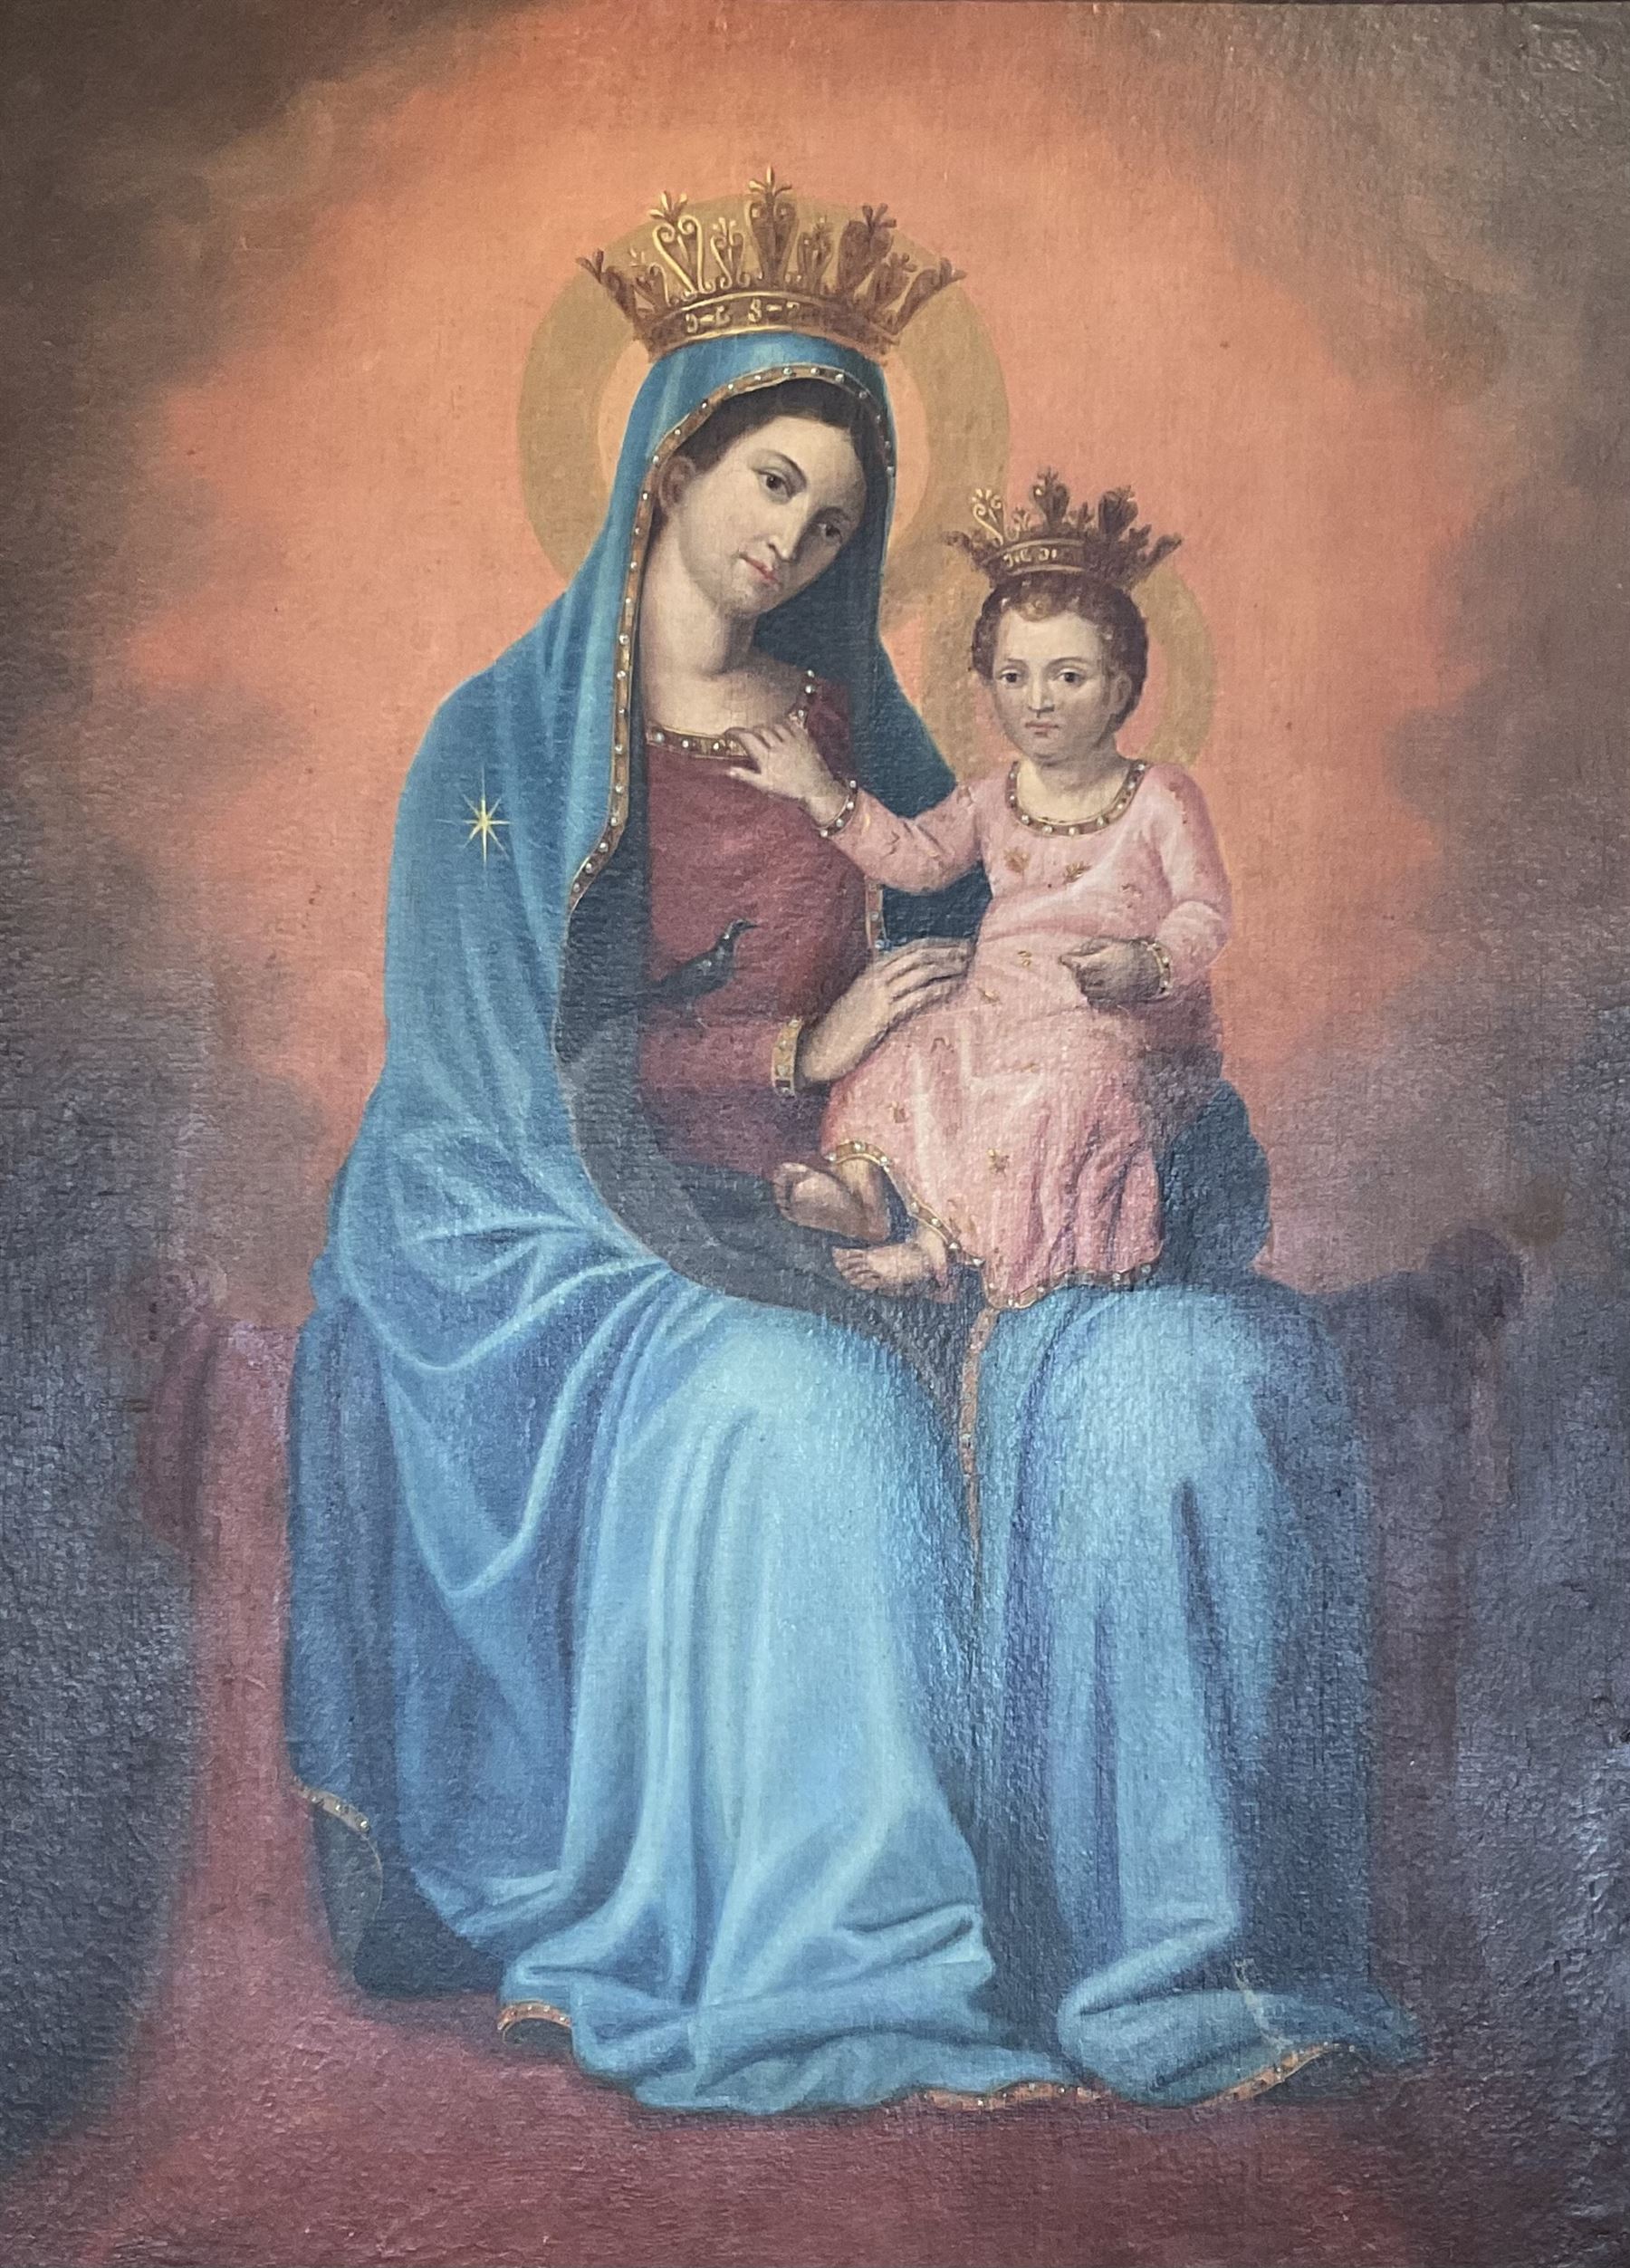 Continental School (18th/19th century): Our Lady of Graces - Madonna and Child